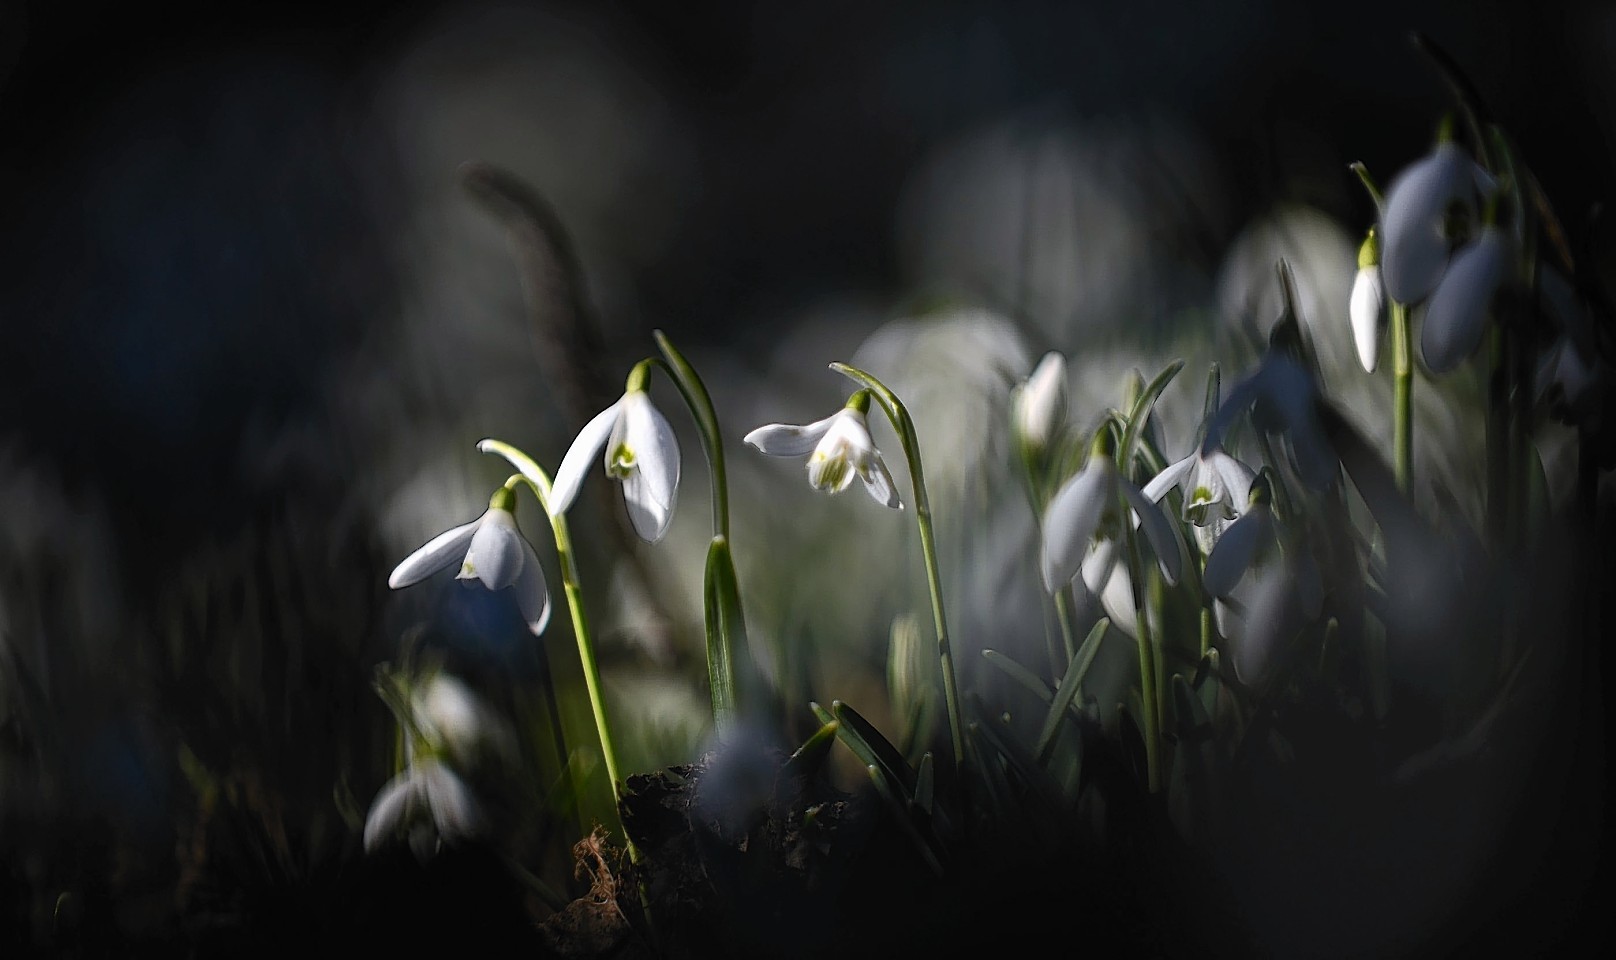 Snowdrops at the House of Dunn near Montrose